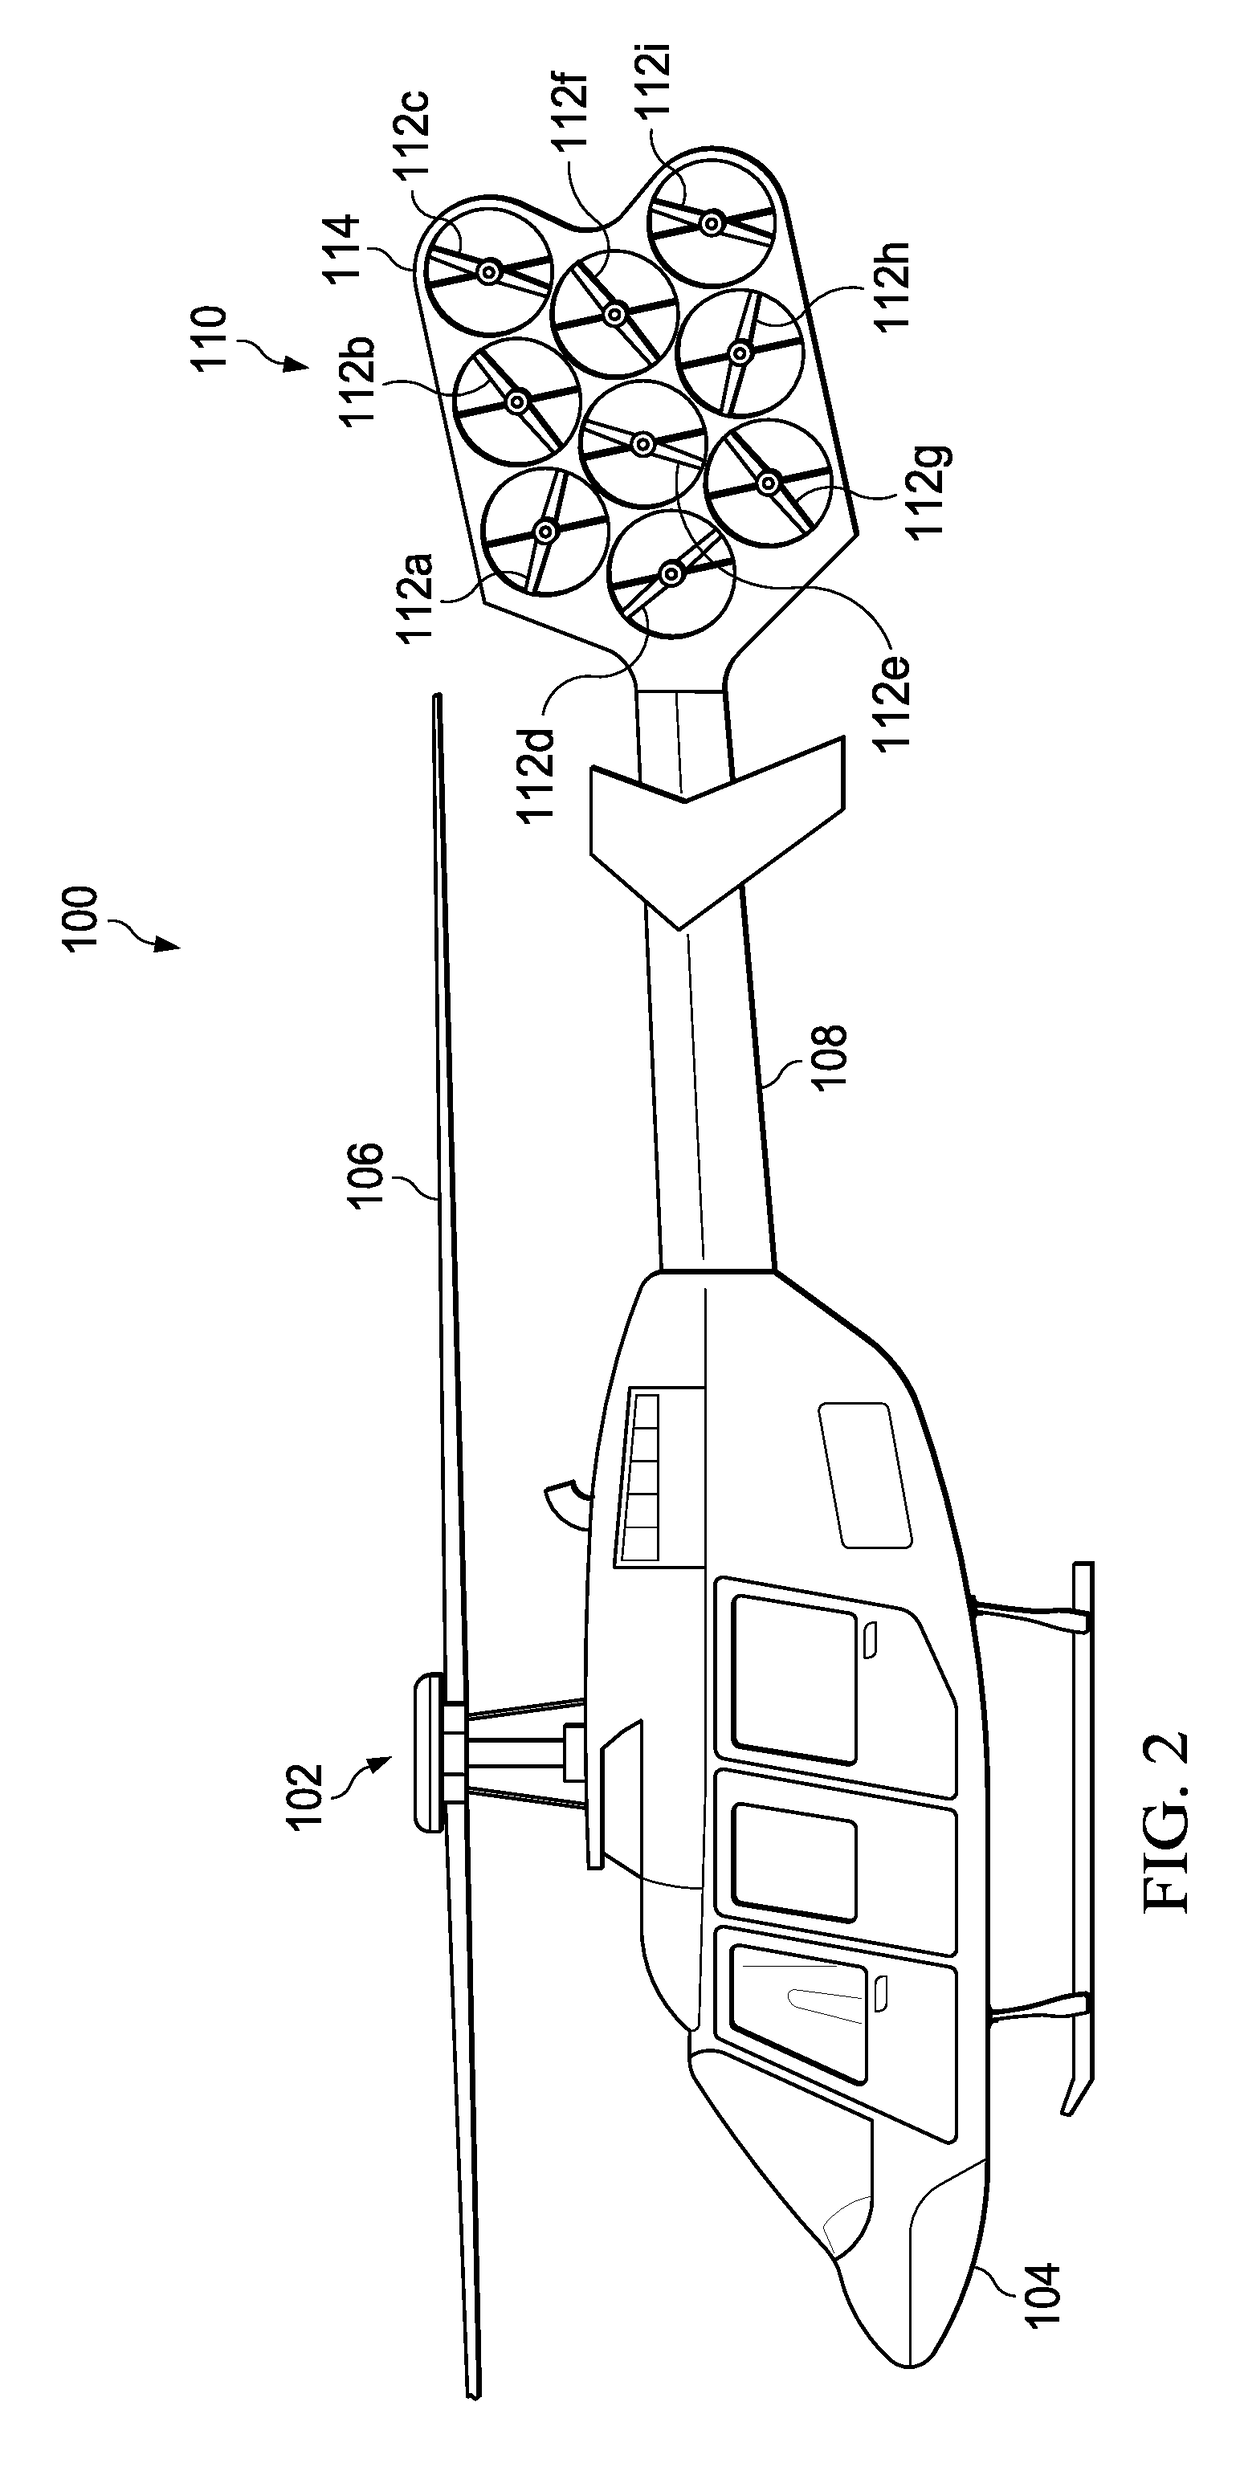 Electric distributed propulsion Anti-torque redundant power and control system